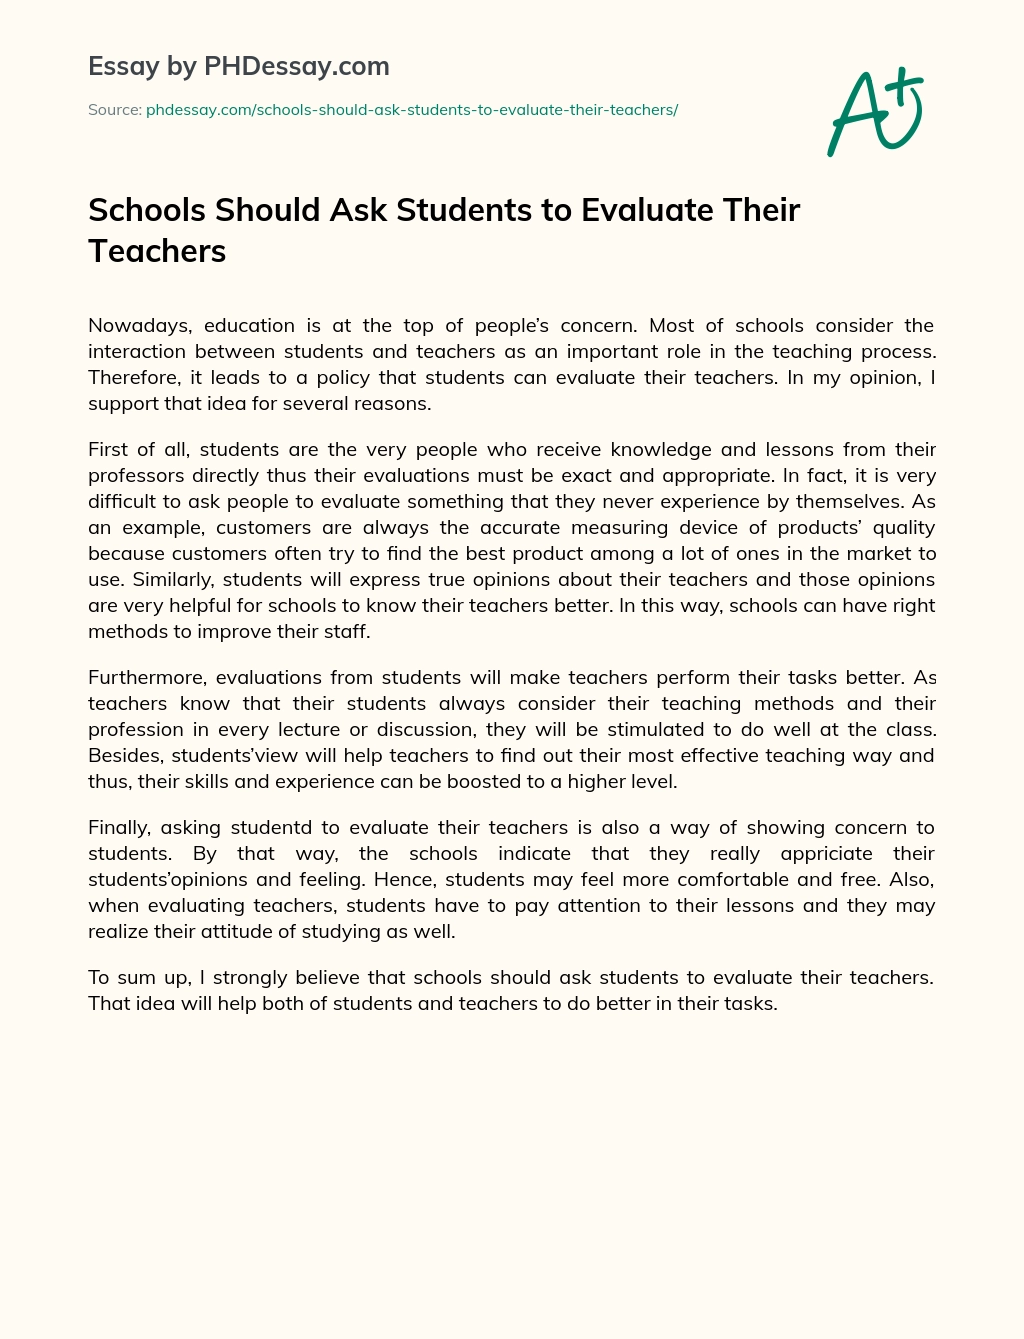 Schools Should Ask Students to Evaluate Their Teachers essay